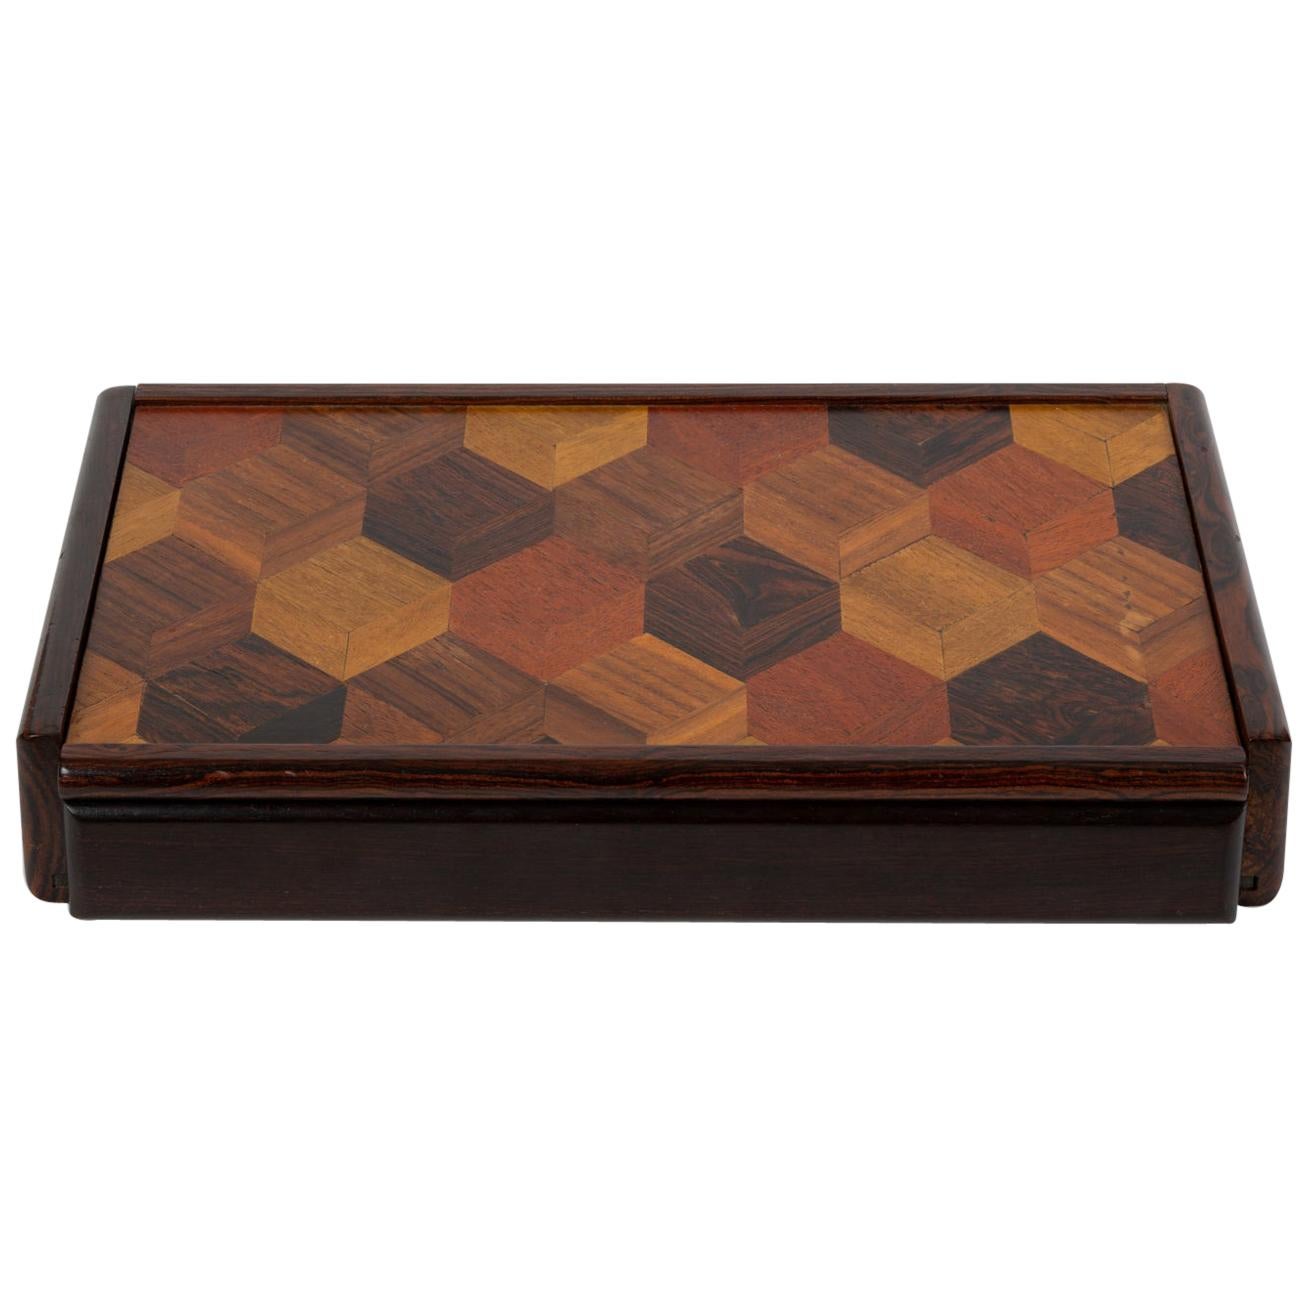 Don Shoemaker Jewelry or Trinket Box with Trompe L’oeil Inlay